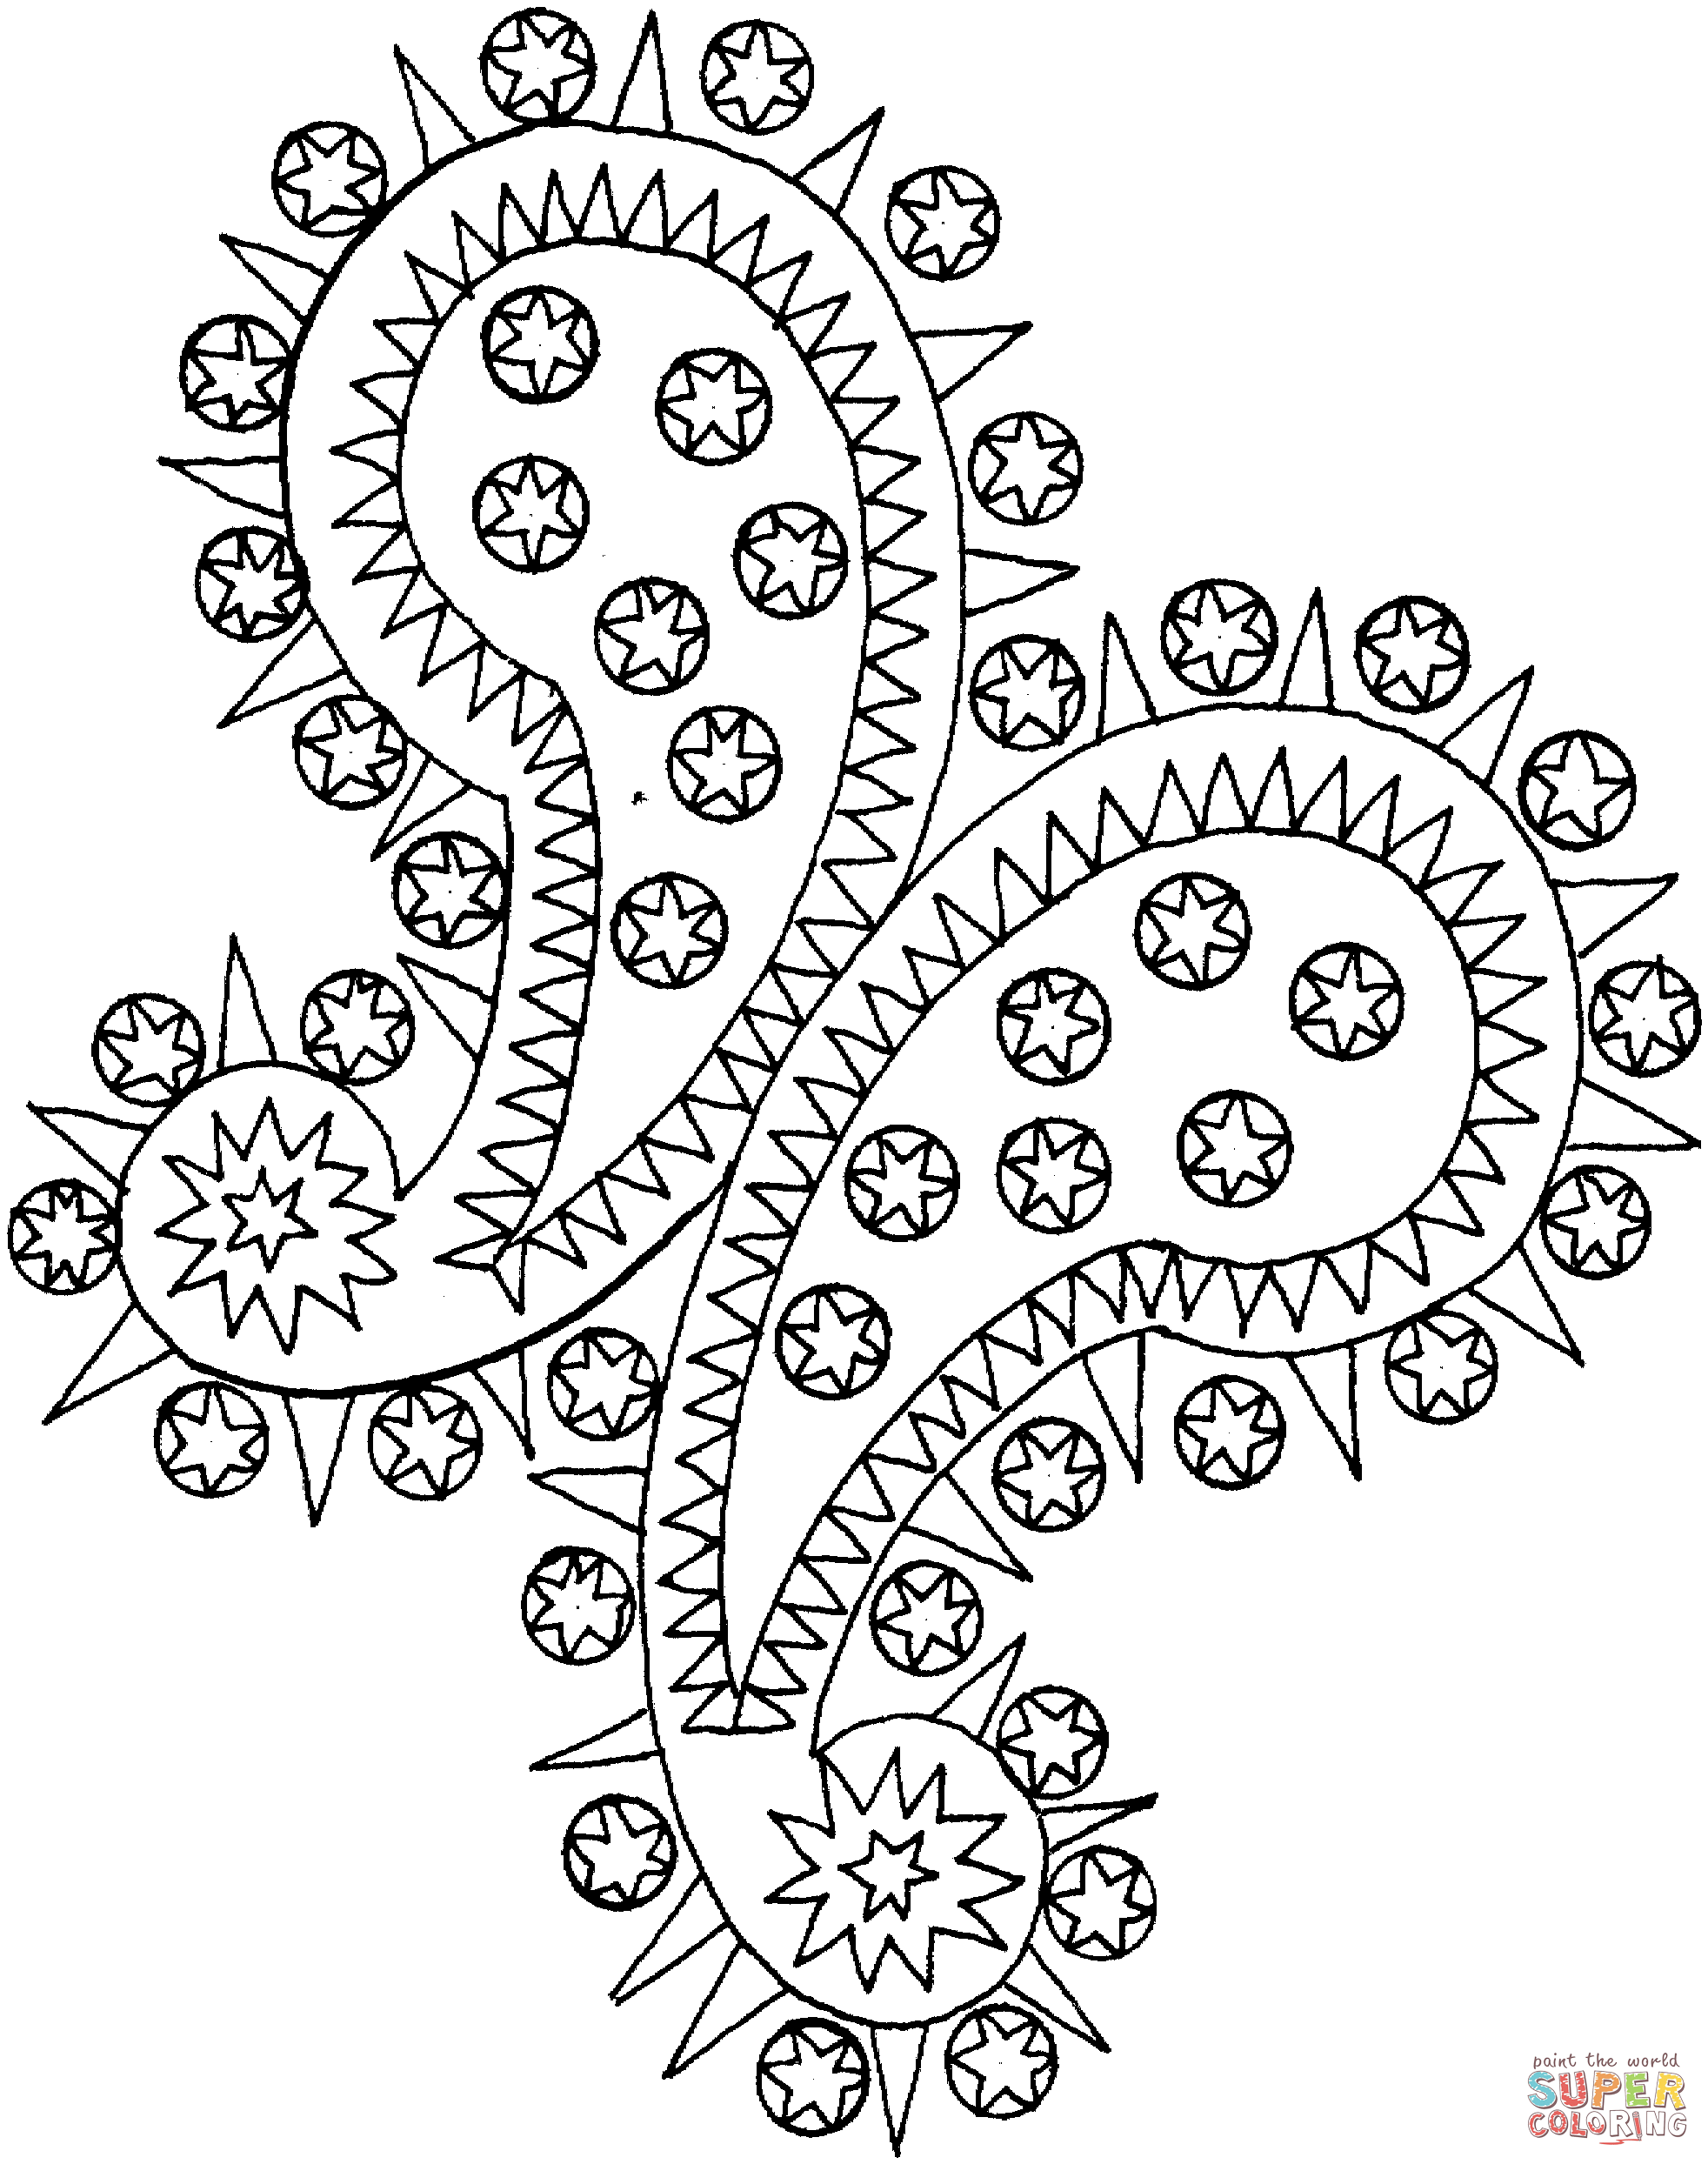 Paisley coloring page | Free Printable Coloring Pages